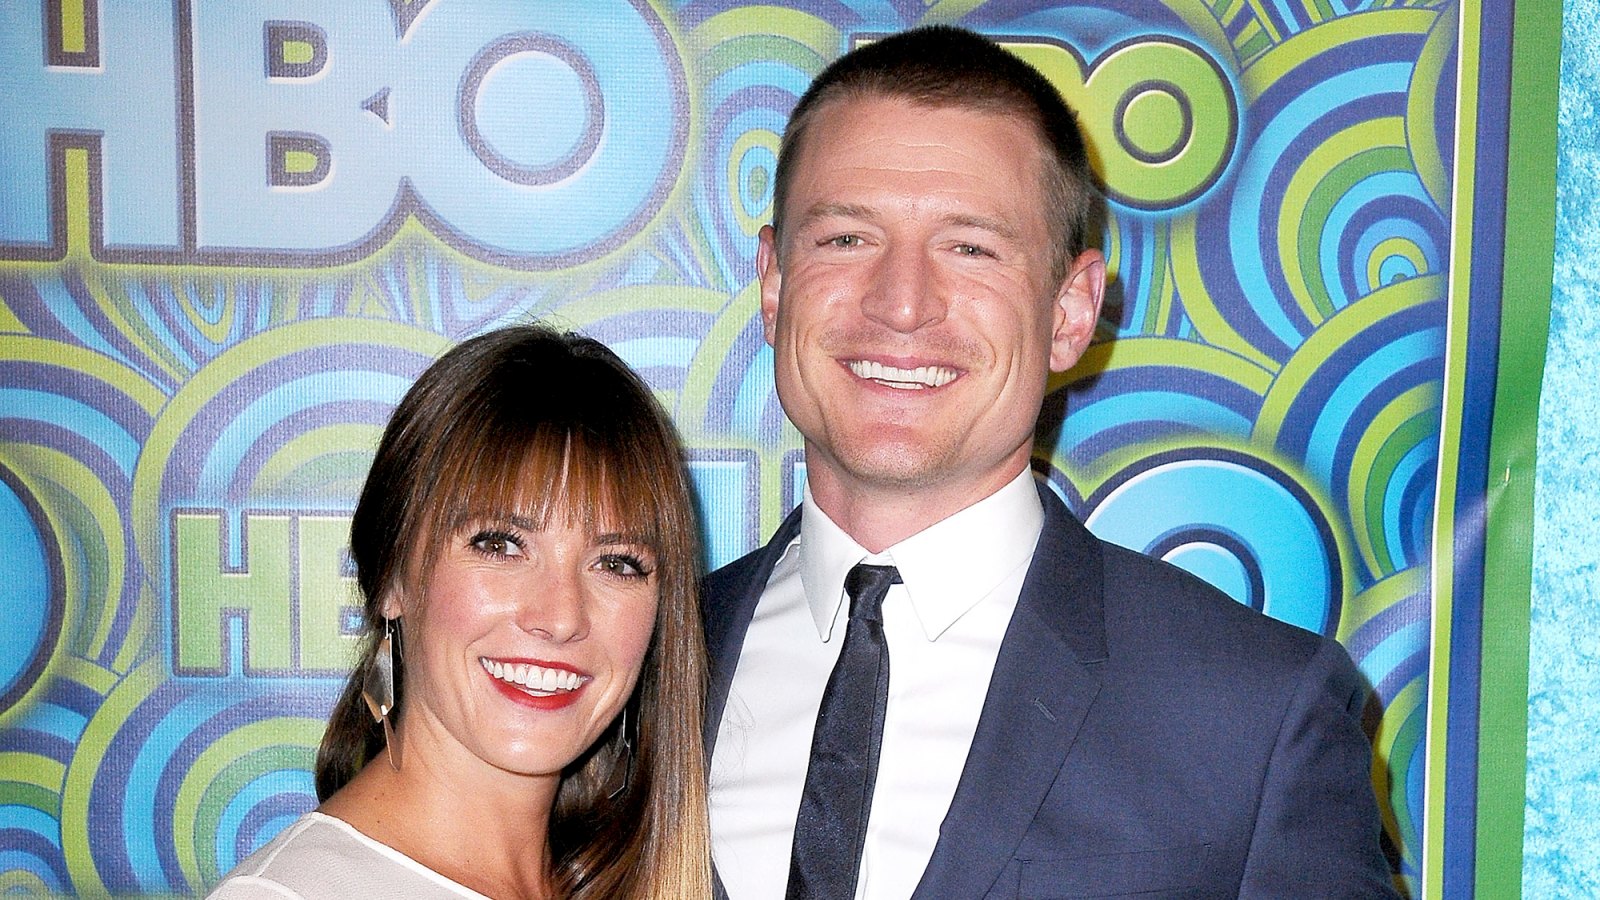 Philip-Winchester-and-his-wife-Megan-welcome-baby